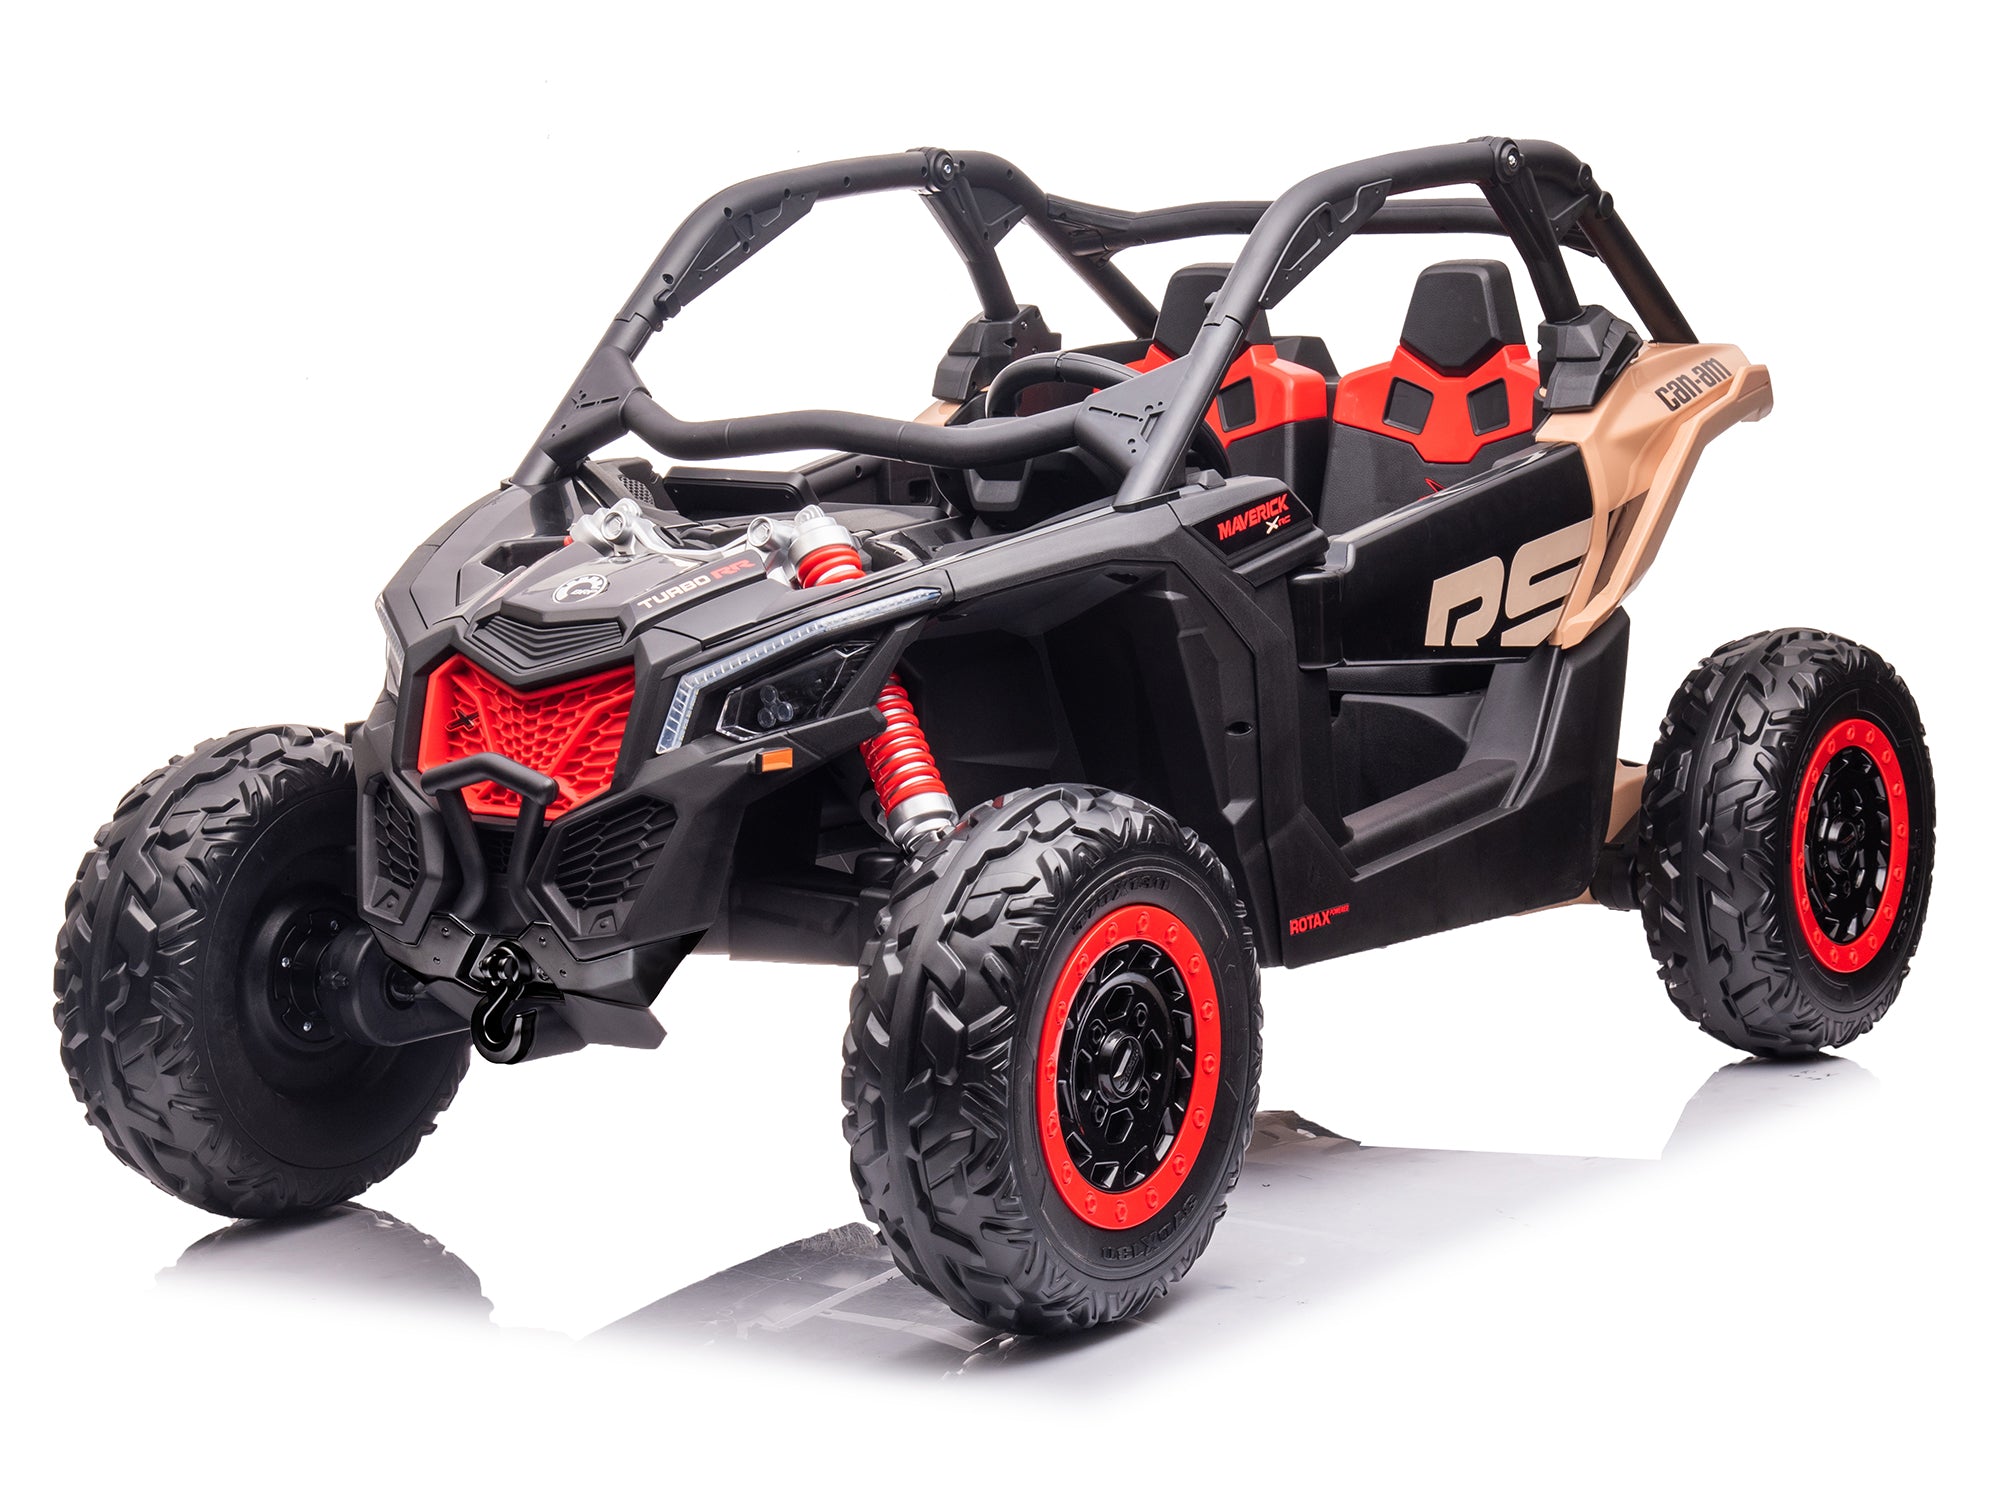 24V Can-Am Maverick X3 Limited Edition RS Kids Buggy – Big Toys Direct